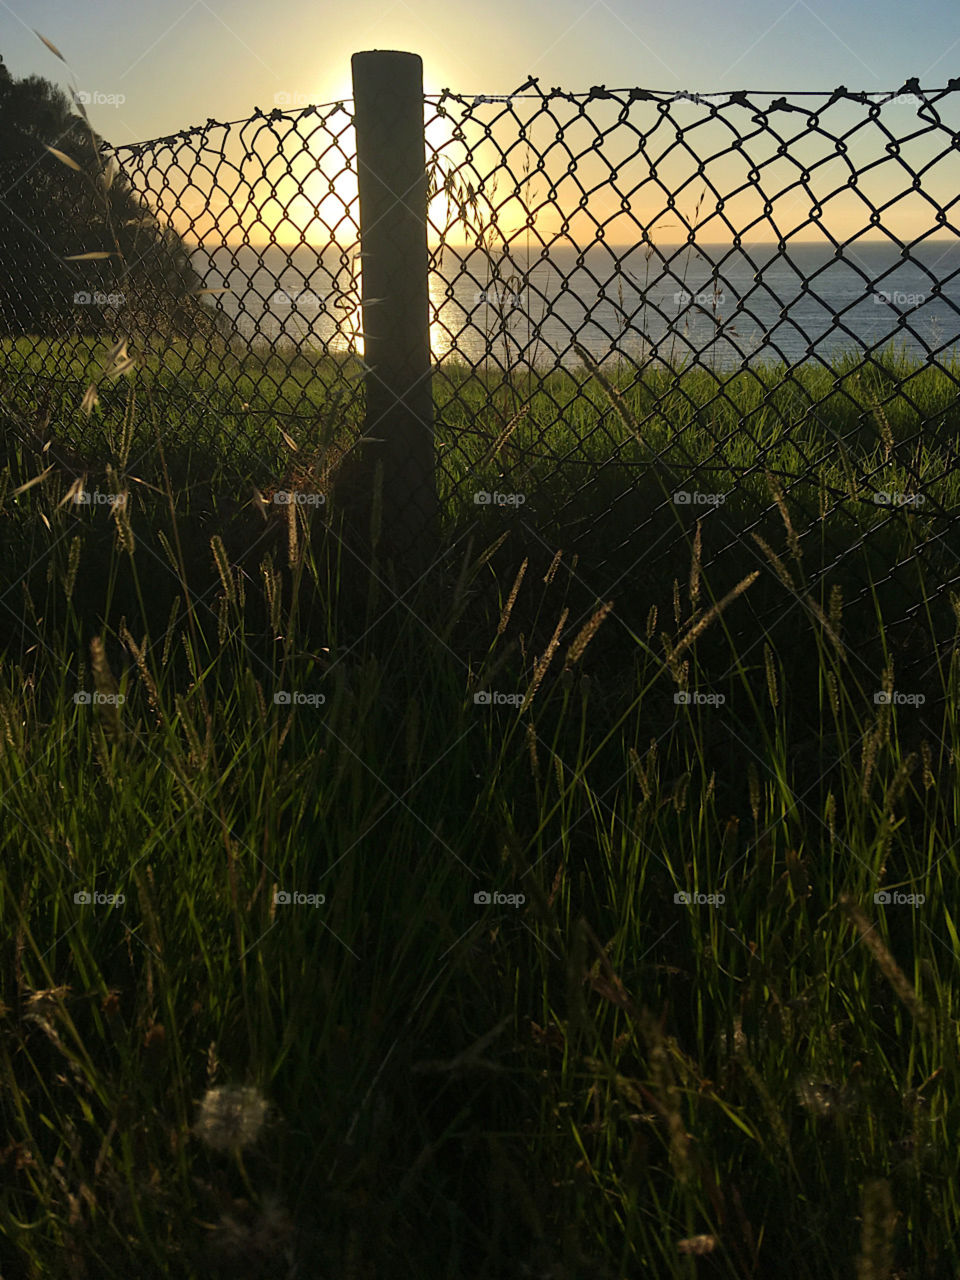 Sun setting over the water through a cliff top fence in Victoria.